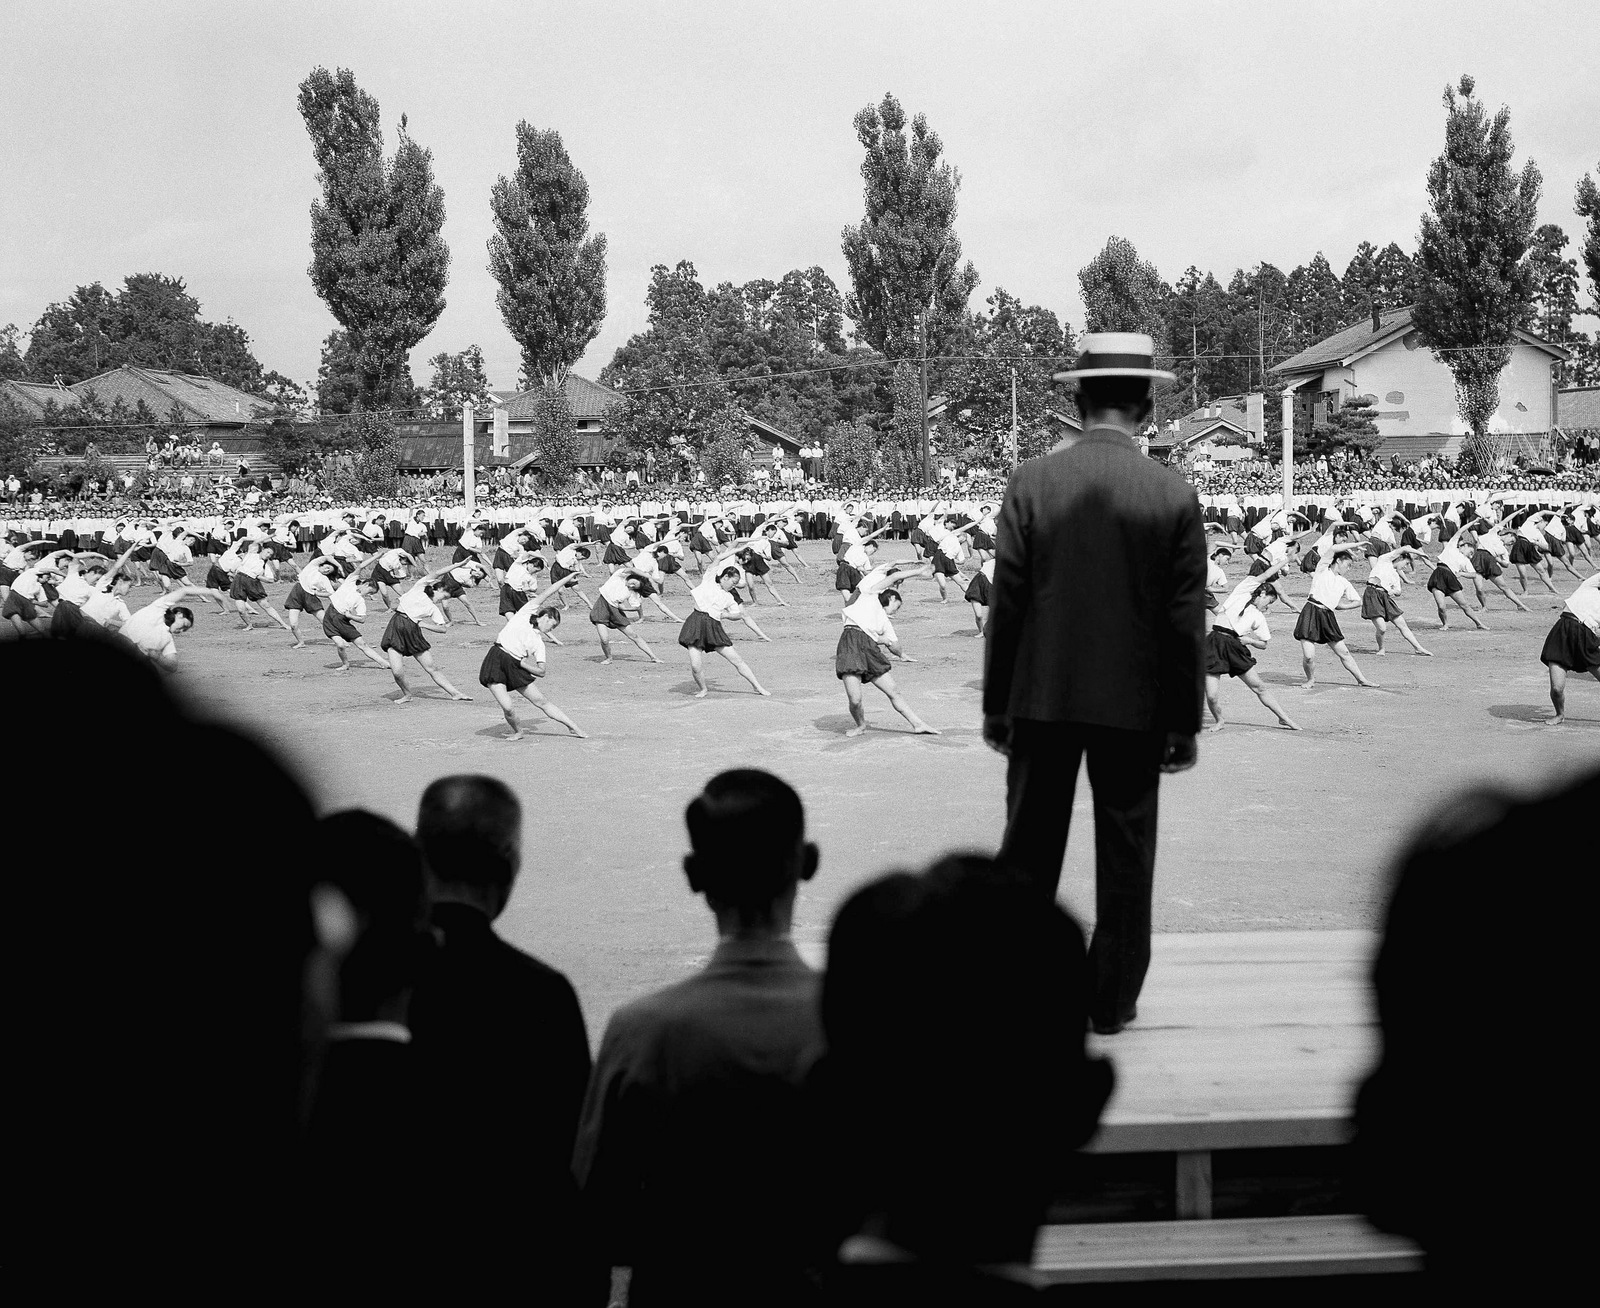 School girls at the Iwate prefecture school go through their calisthenic exercises for the Emperor Hirohito (back to camera) in Japan on August 10, 1947. (AP/Charles P. Gorry)